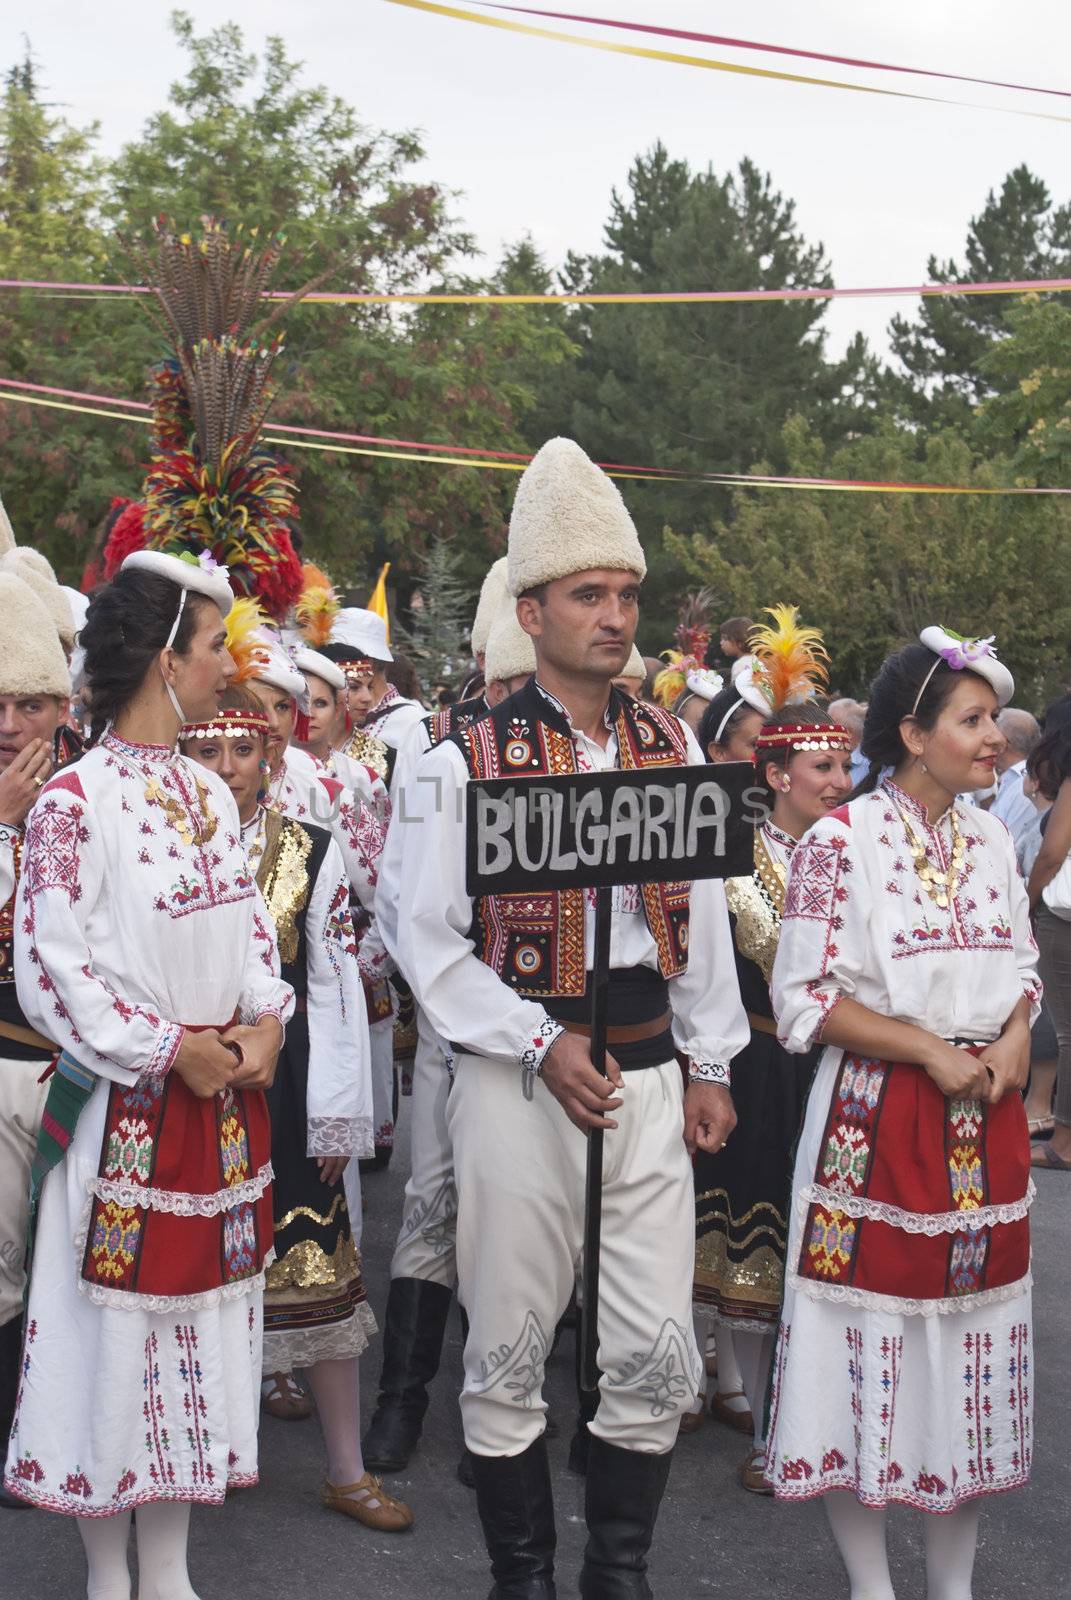 POLIZZI GENEROSA, SICILY-AUGUST 19: folk group from bulgaria at the "Festival of hazelnuts" dance and parade on August 19, 2012 in Polizzi Generosa, Sicily, Italy